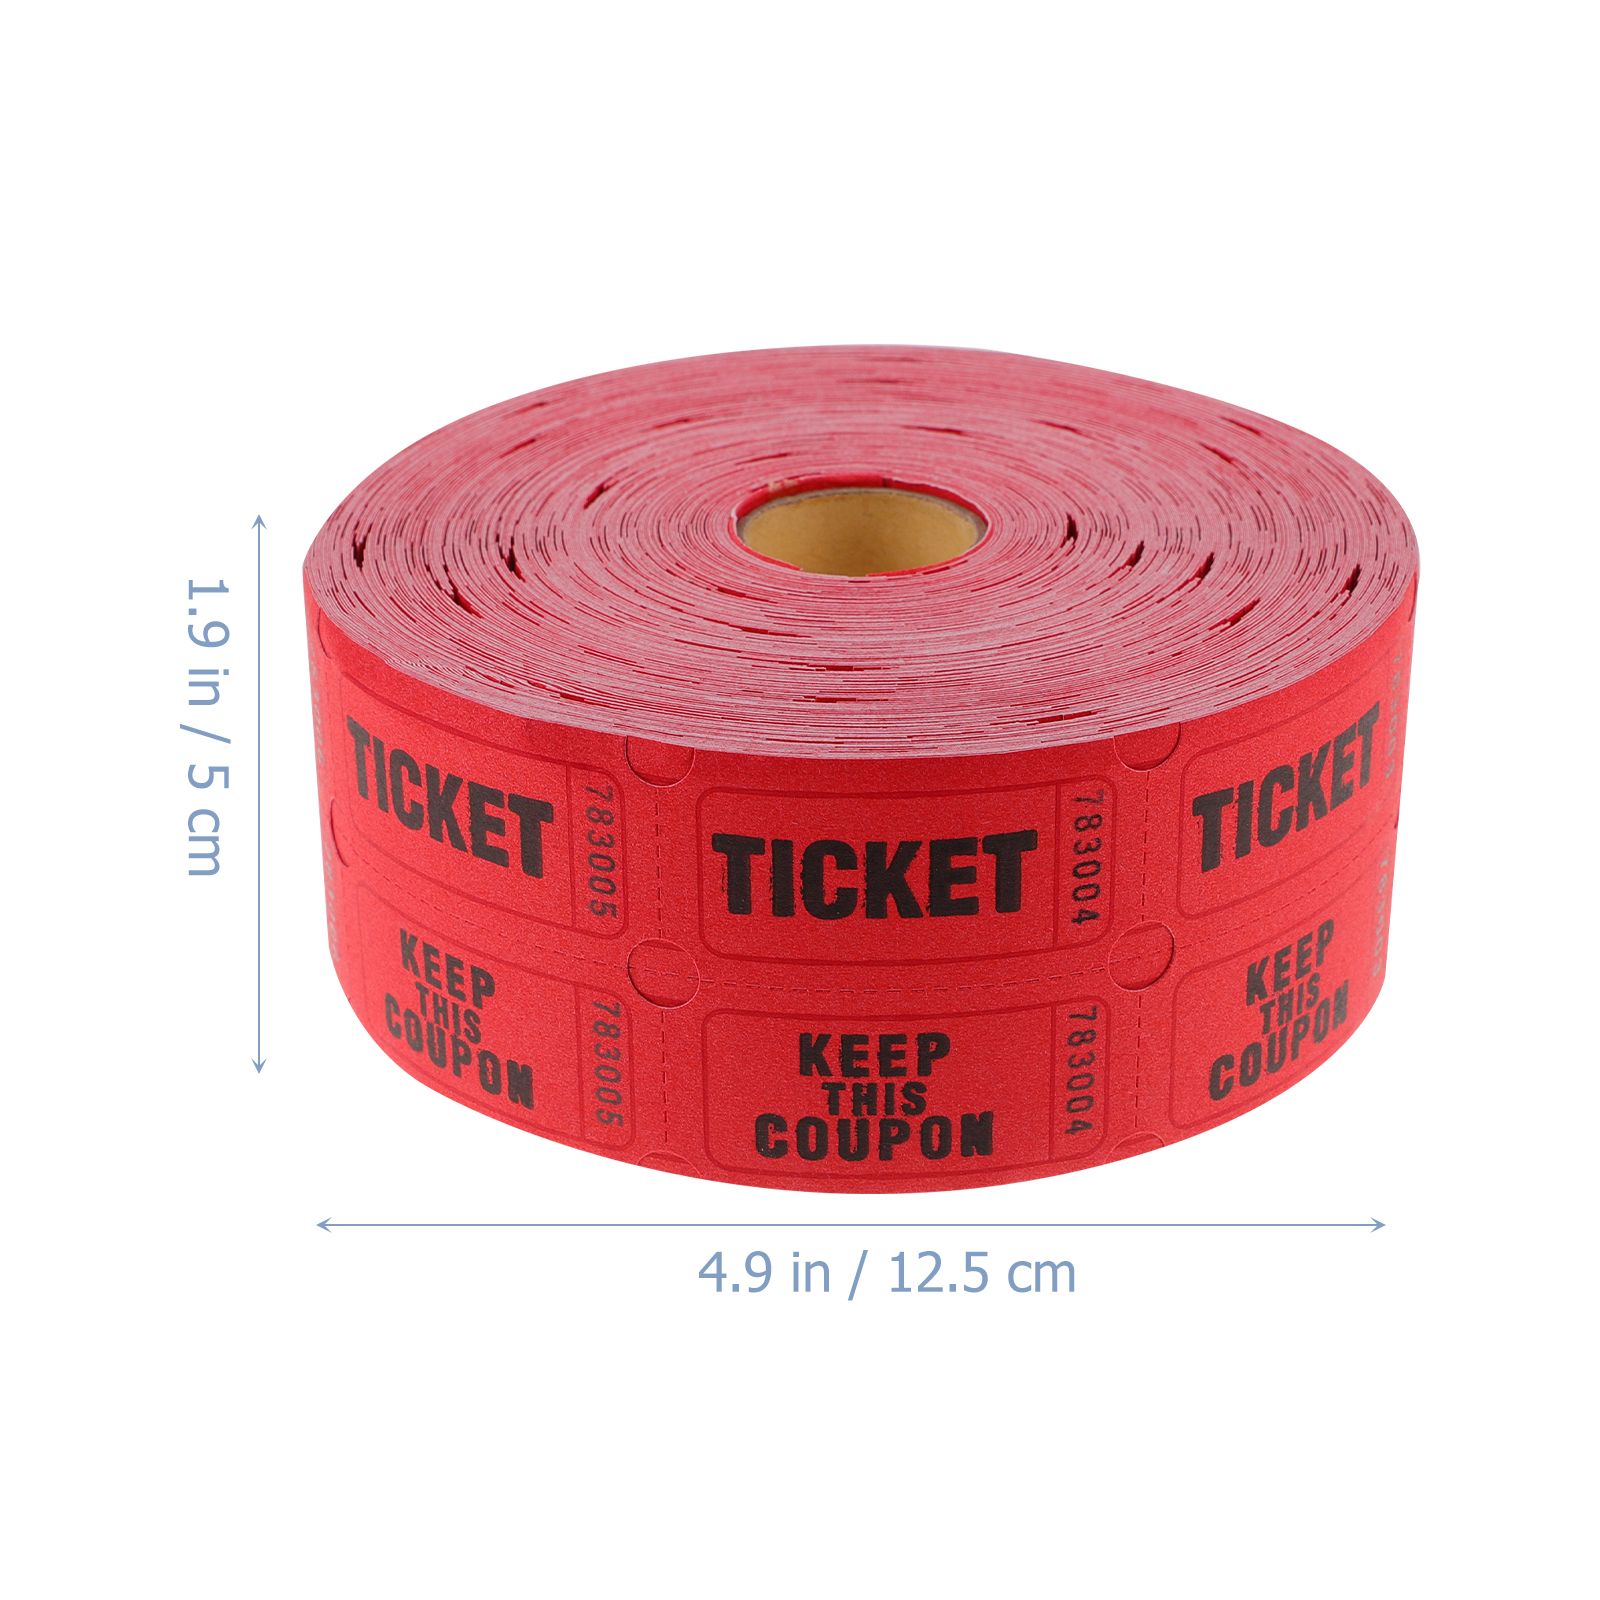 1-Roll-of-Raffle-Tickets-Universal-Ticket-Labels-Universal-Ticket-Roll-Events-Tickets-Universal-Tickets